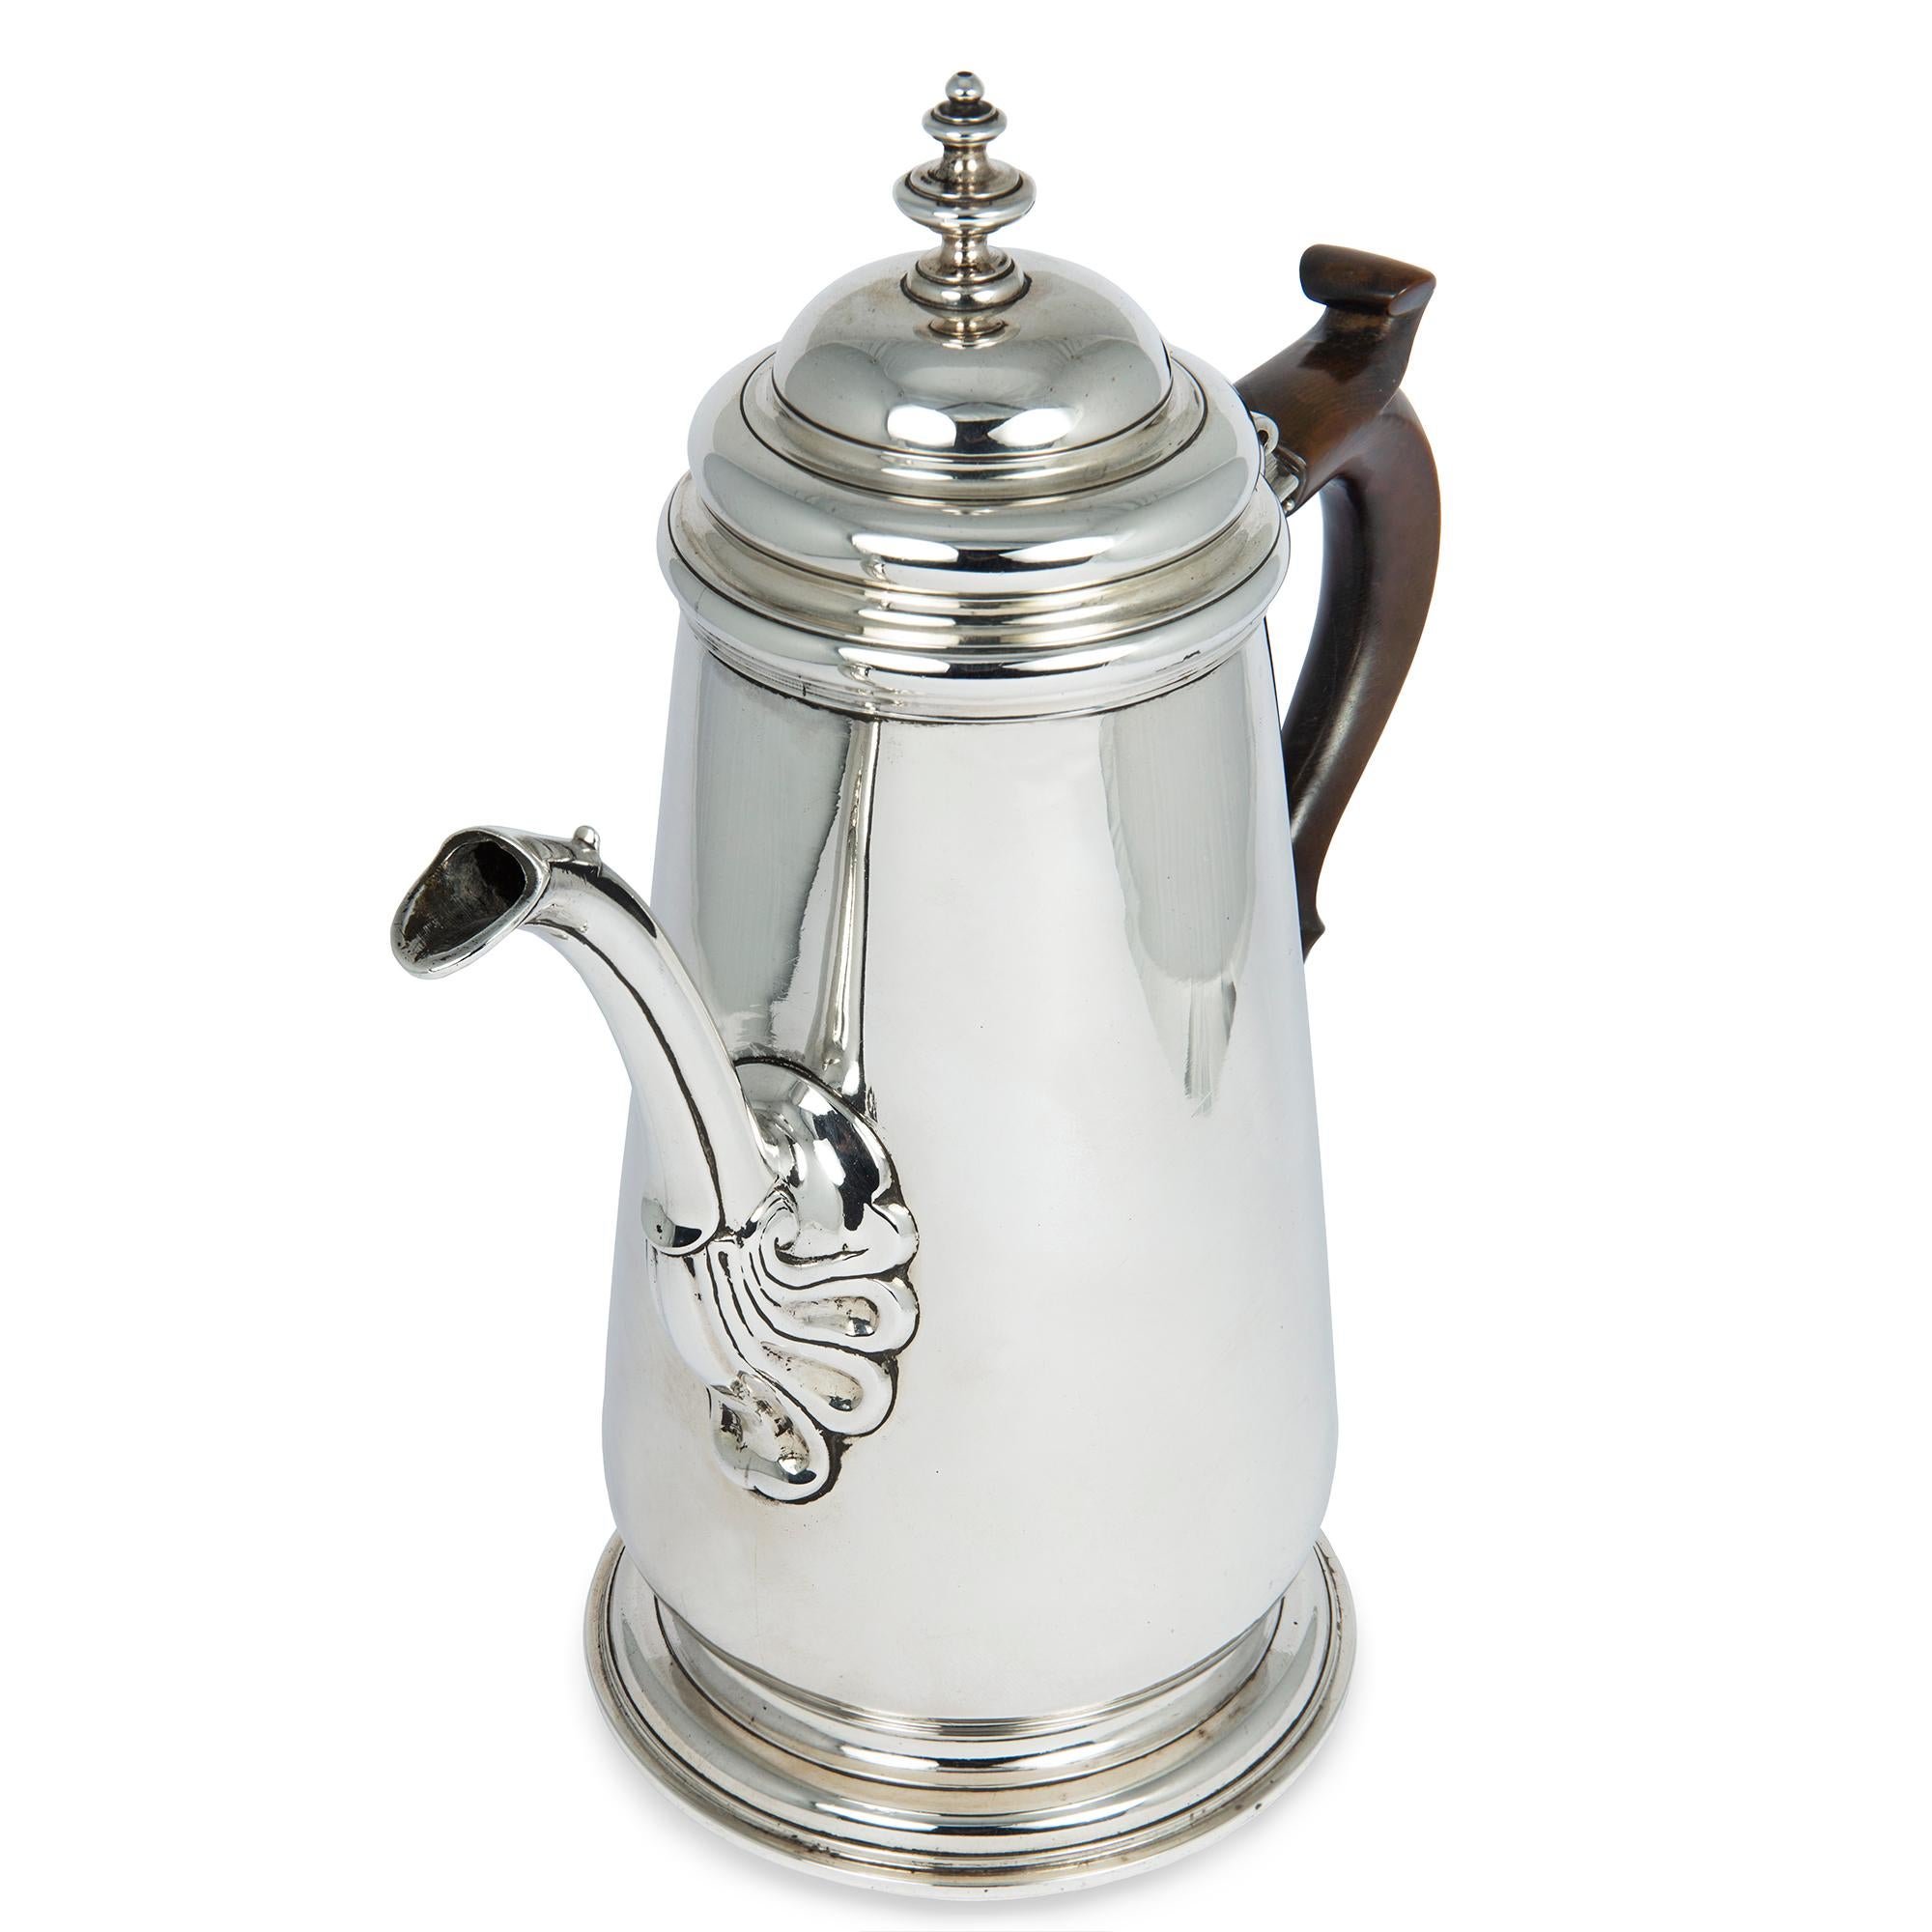 A George II sterling silver coffee pot, the baluster shape body with acanthus leaf decoration to the base of the spout, dark wood scroll handle, height 10